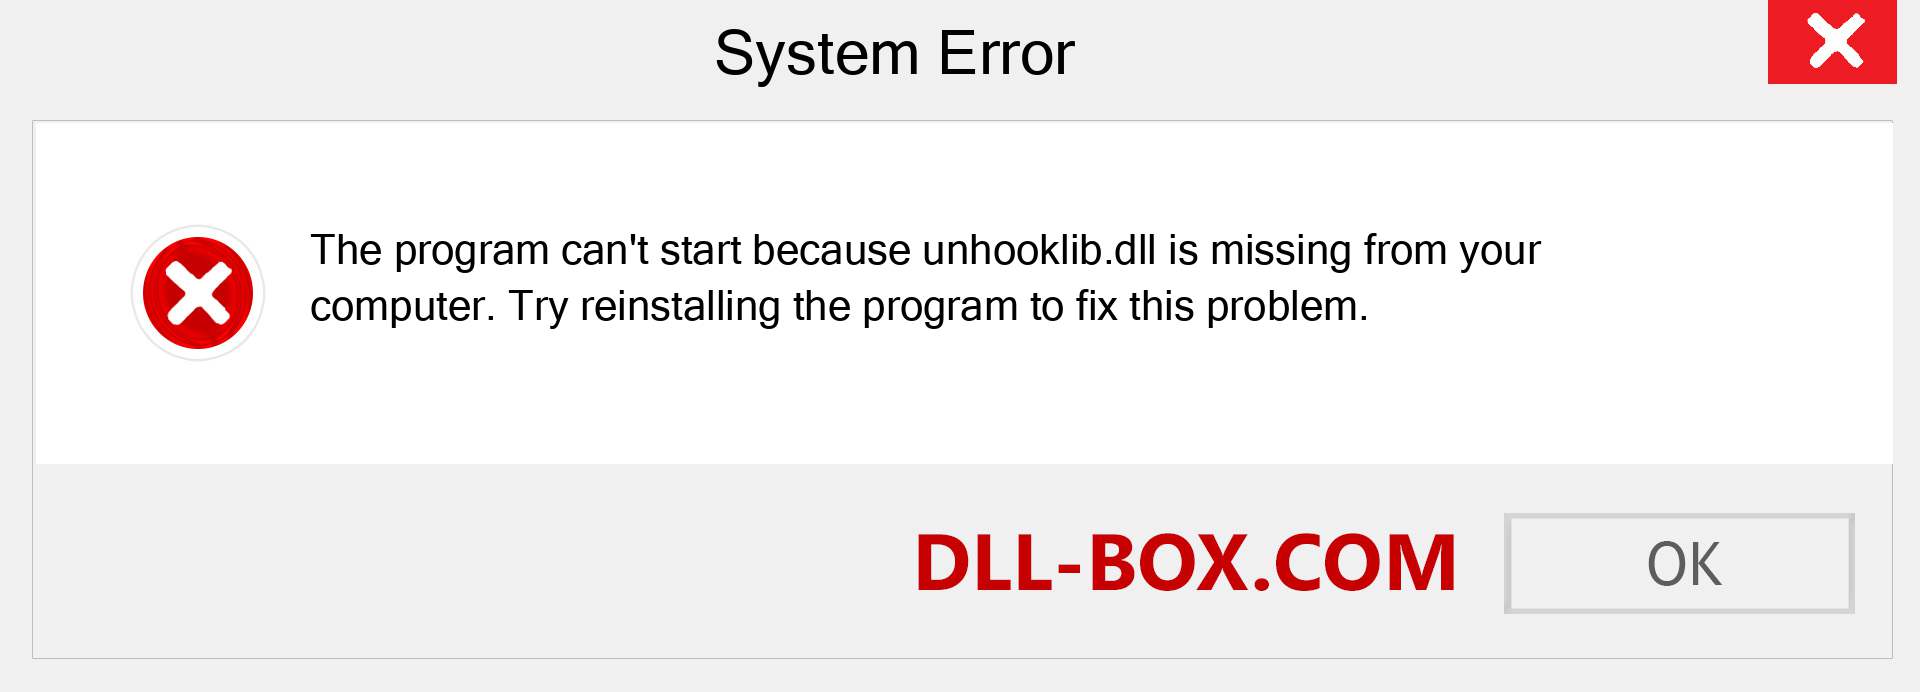  unhooklib.dll file is missing?. Download for Windows 7, 8, 10 - Fix  unhooklib dll Missing Error on Windows, photos, images